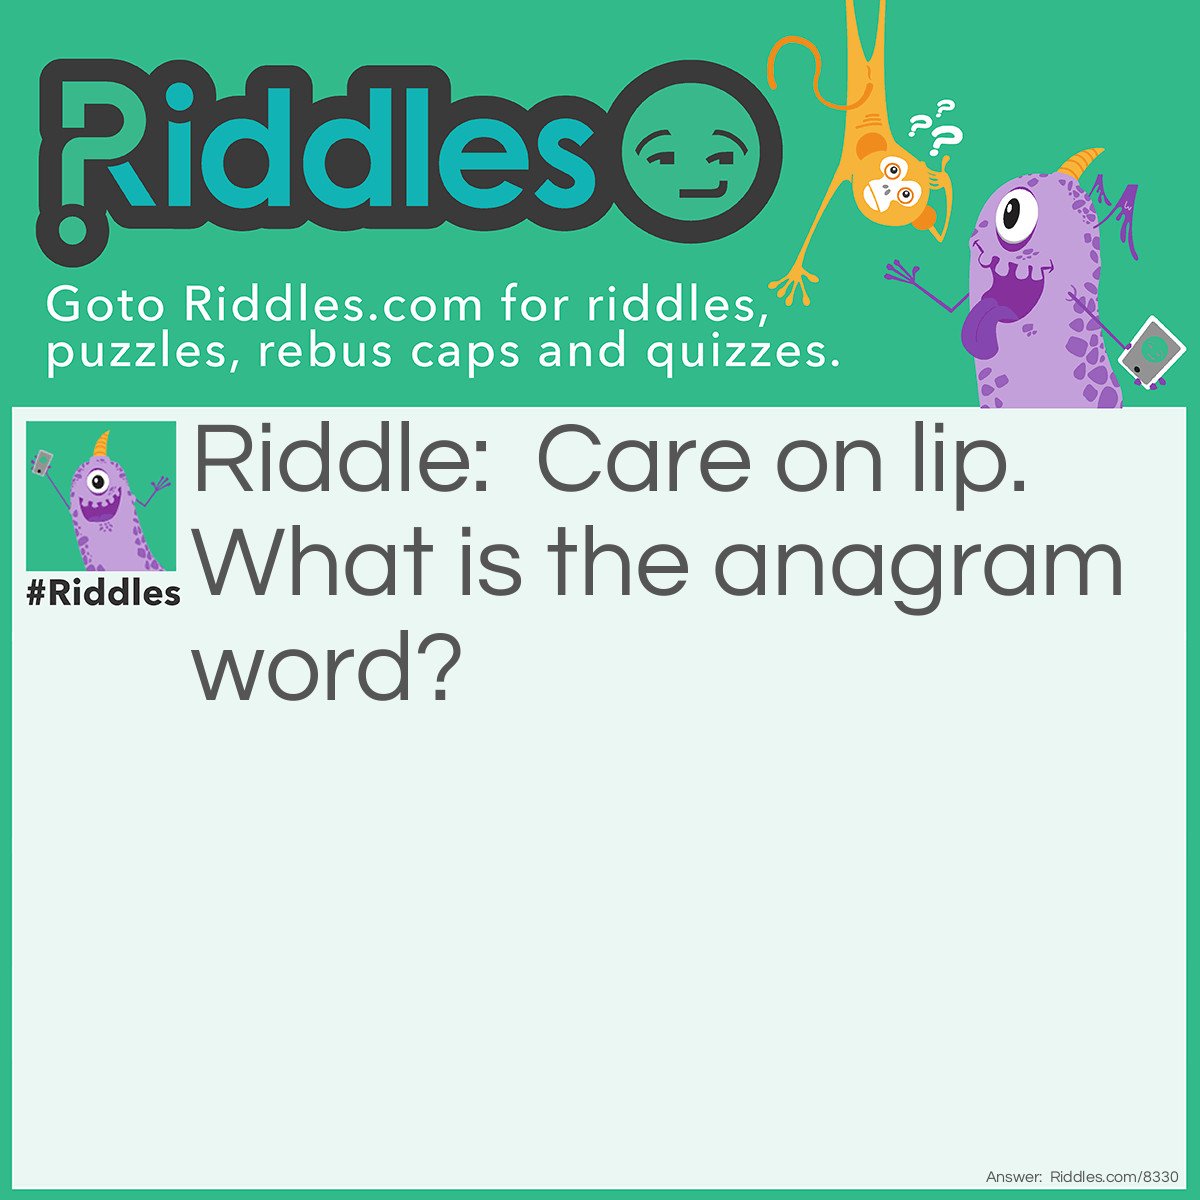 Riddle: Care on lip. What is the anagrammed word? Answer: Porcelain.